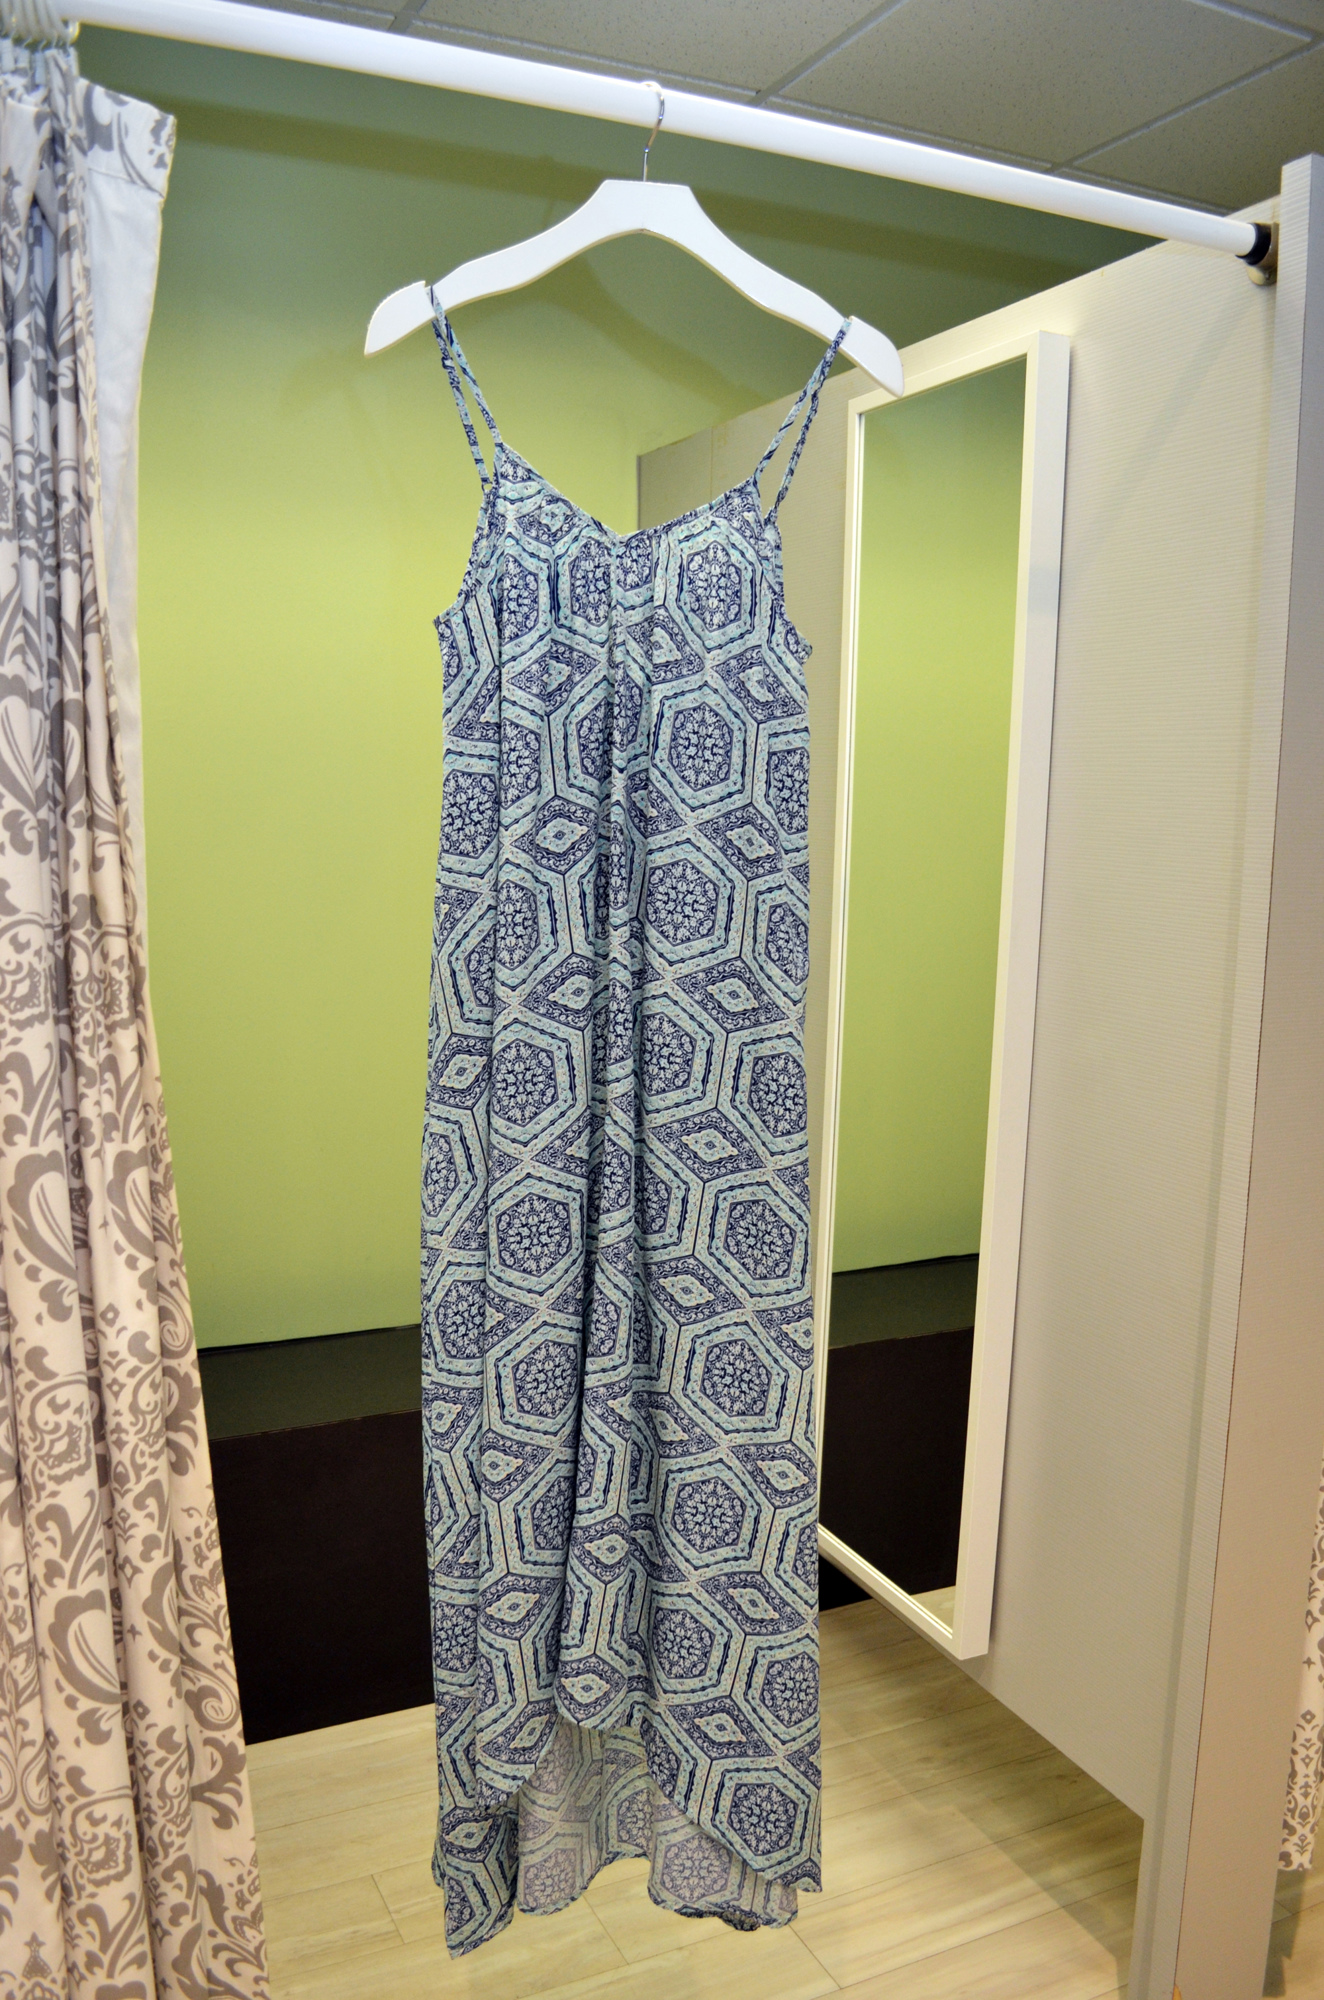 Maxi dresses are a go-to during those nine months. For one, they fit the growing belly, they're airy in this Florida summer heat and they make you look and feel cute. Pink Stitch resort maxi dress, $